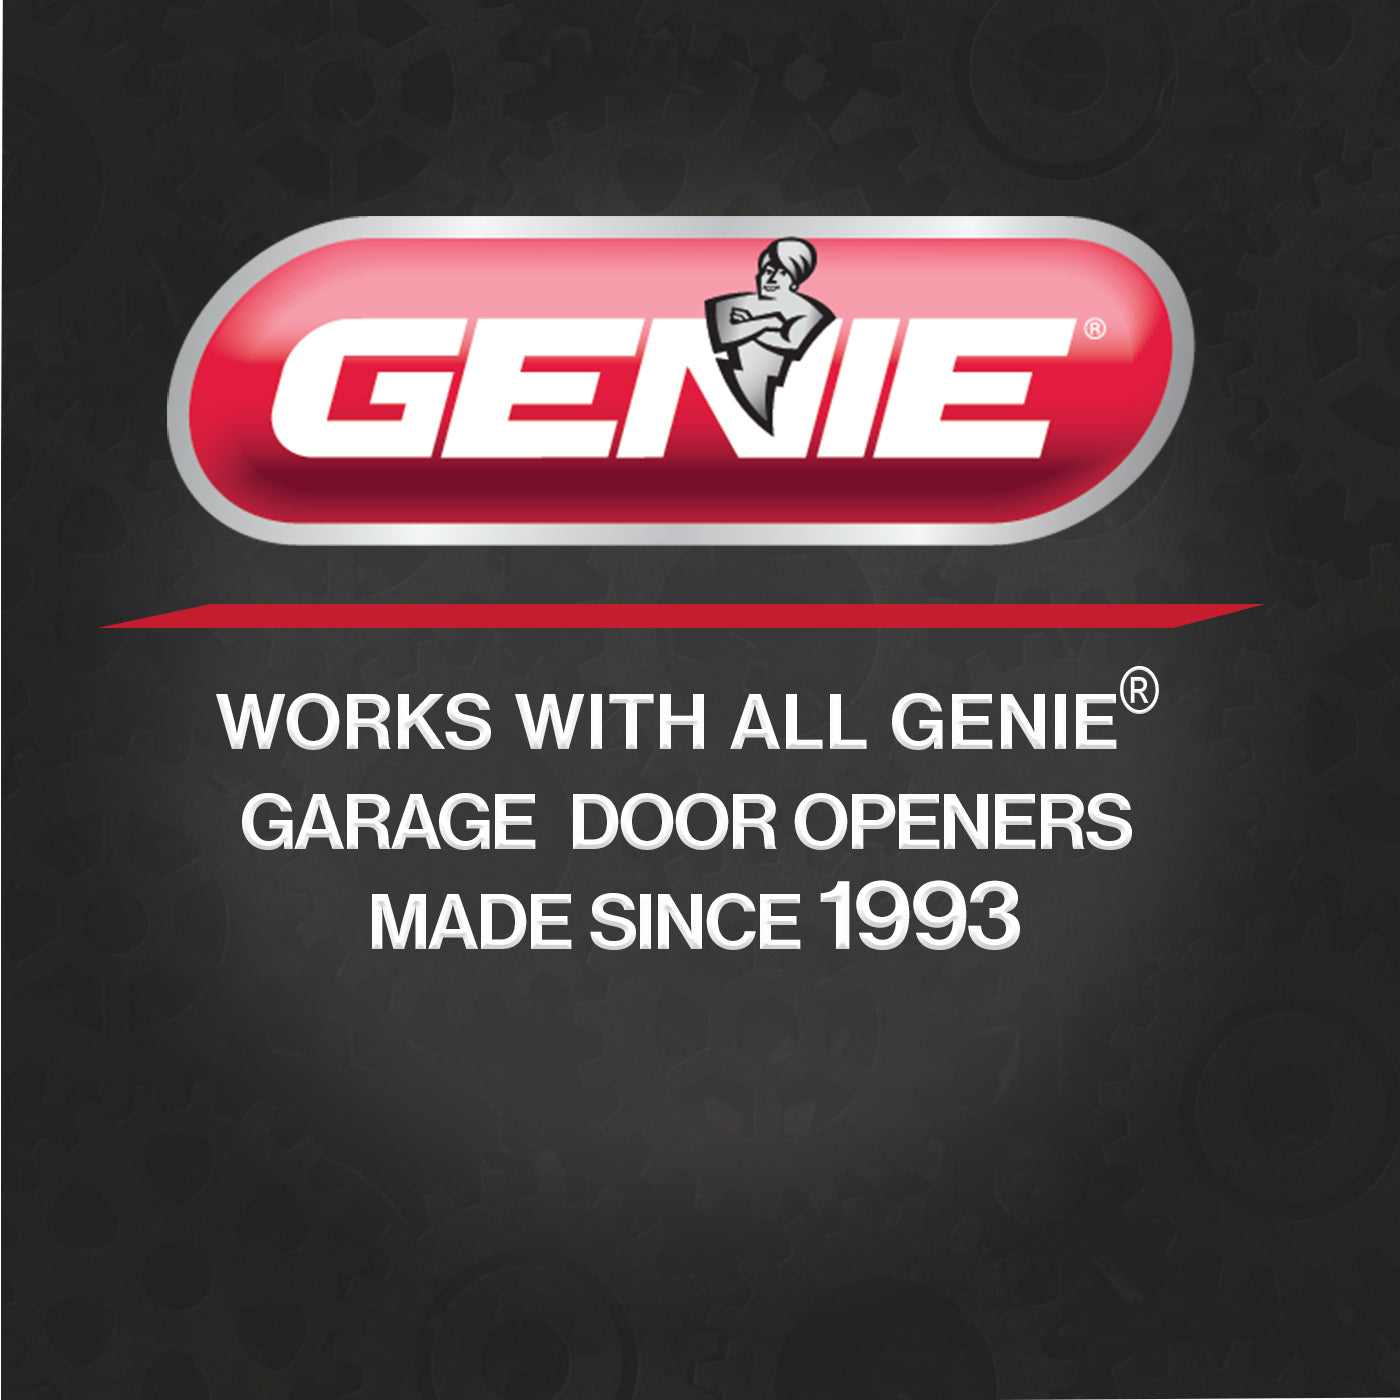 Works with all Genie garage door openers made since 1993